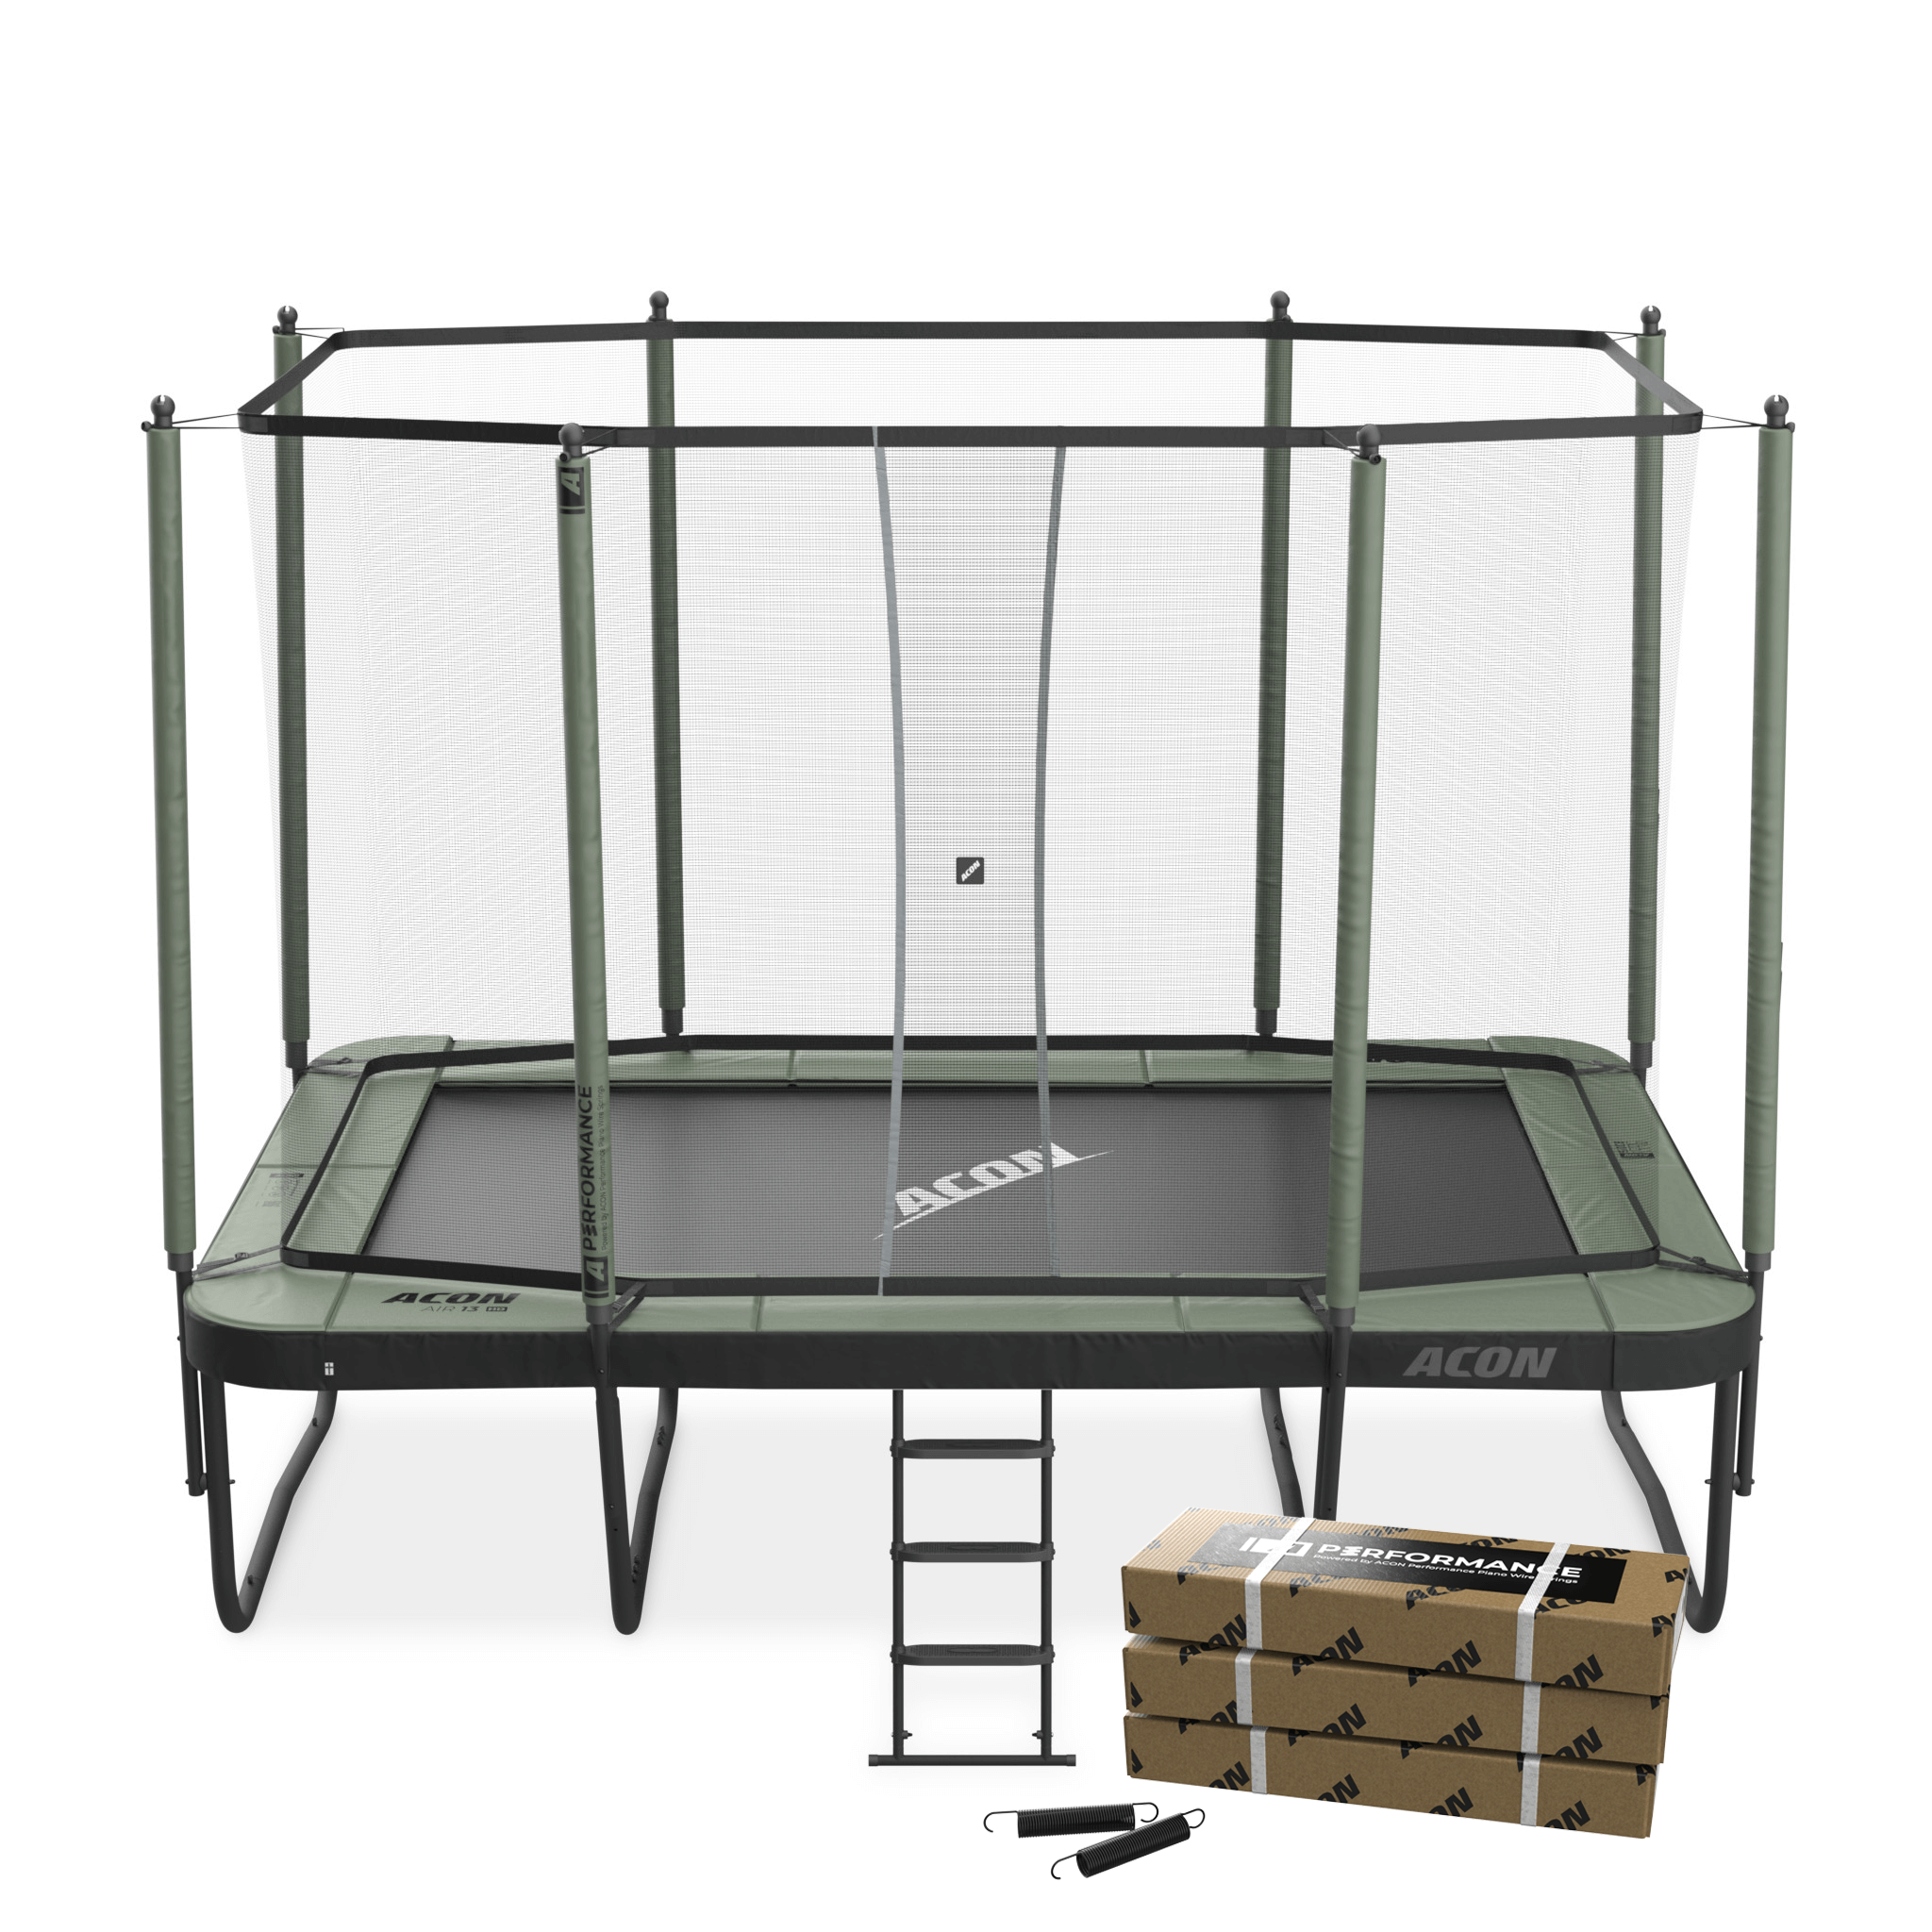 ACON Air 13 HD Performance Trampoline with Safety Net, ladder and Performance Springs.